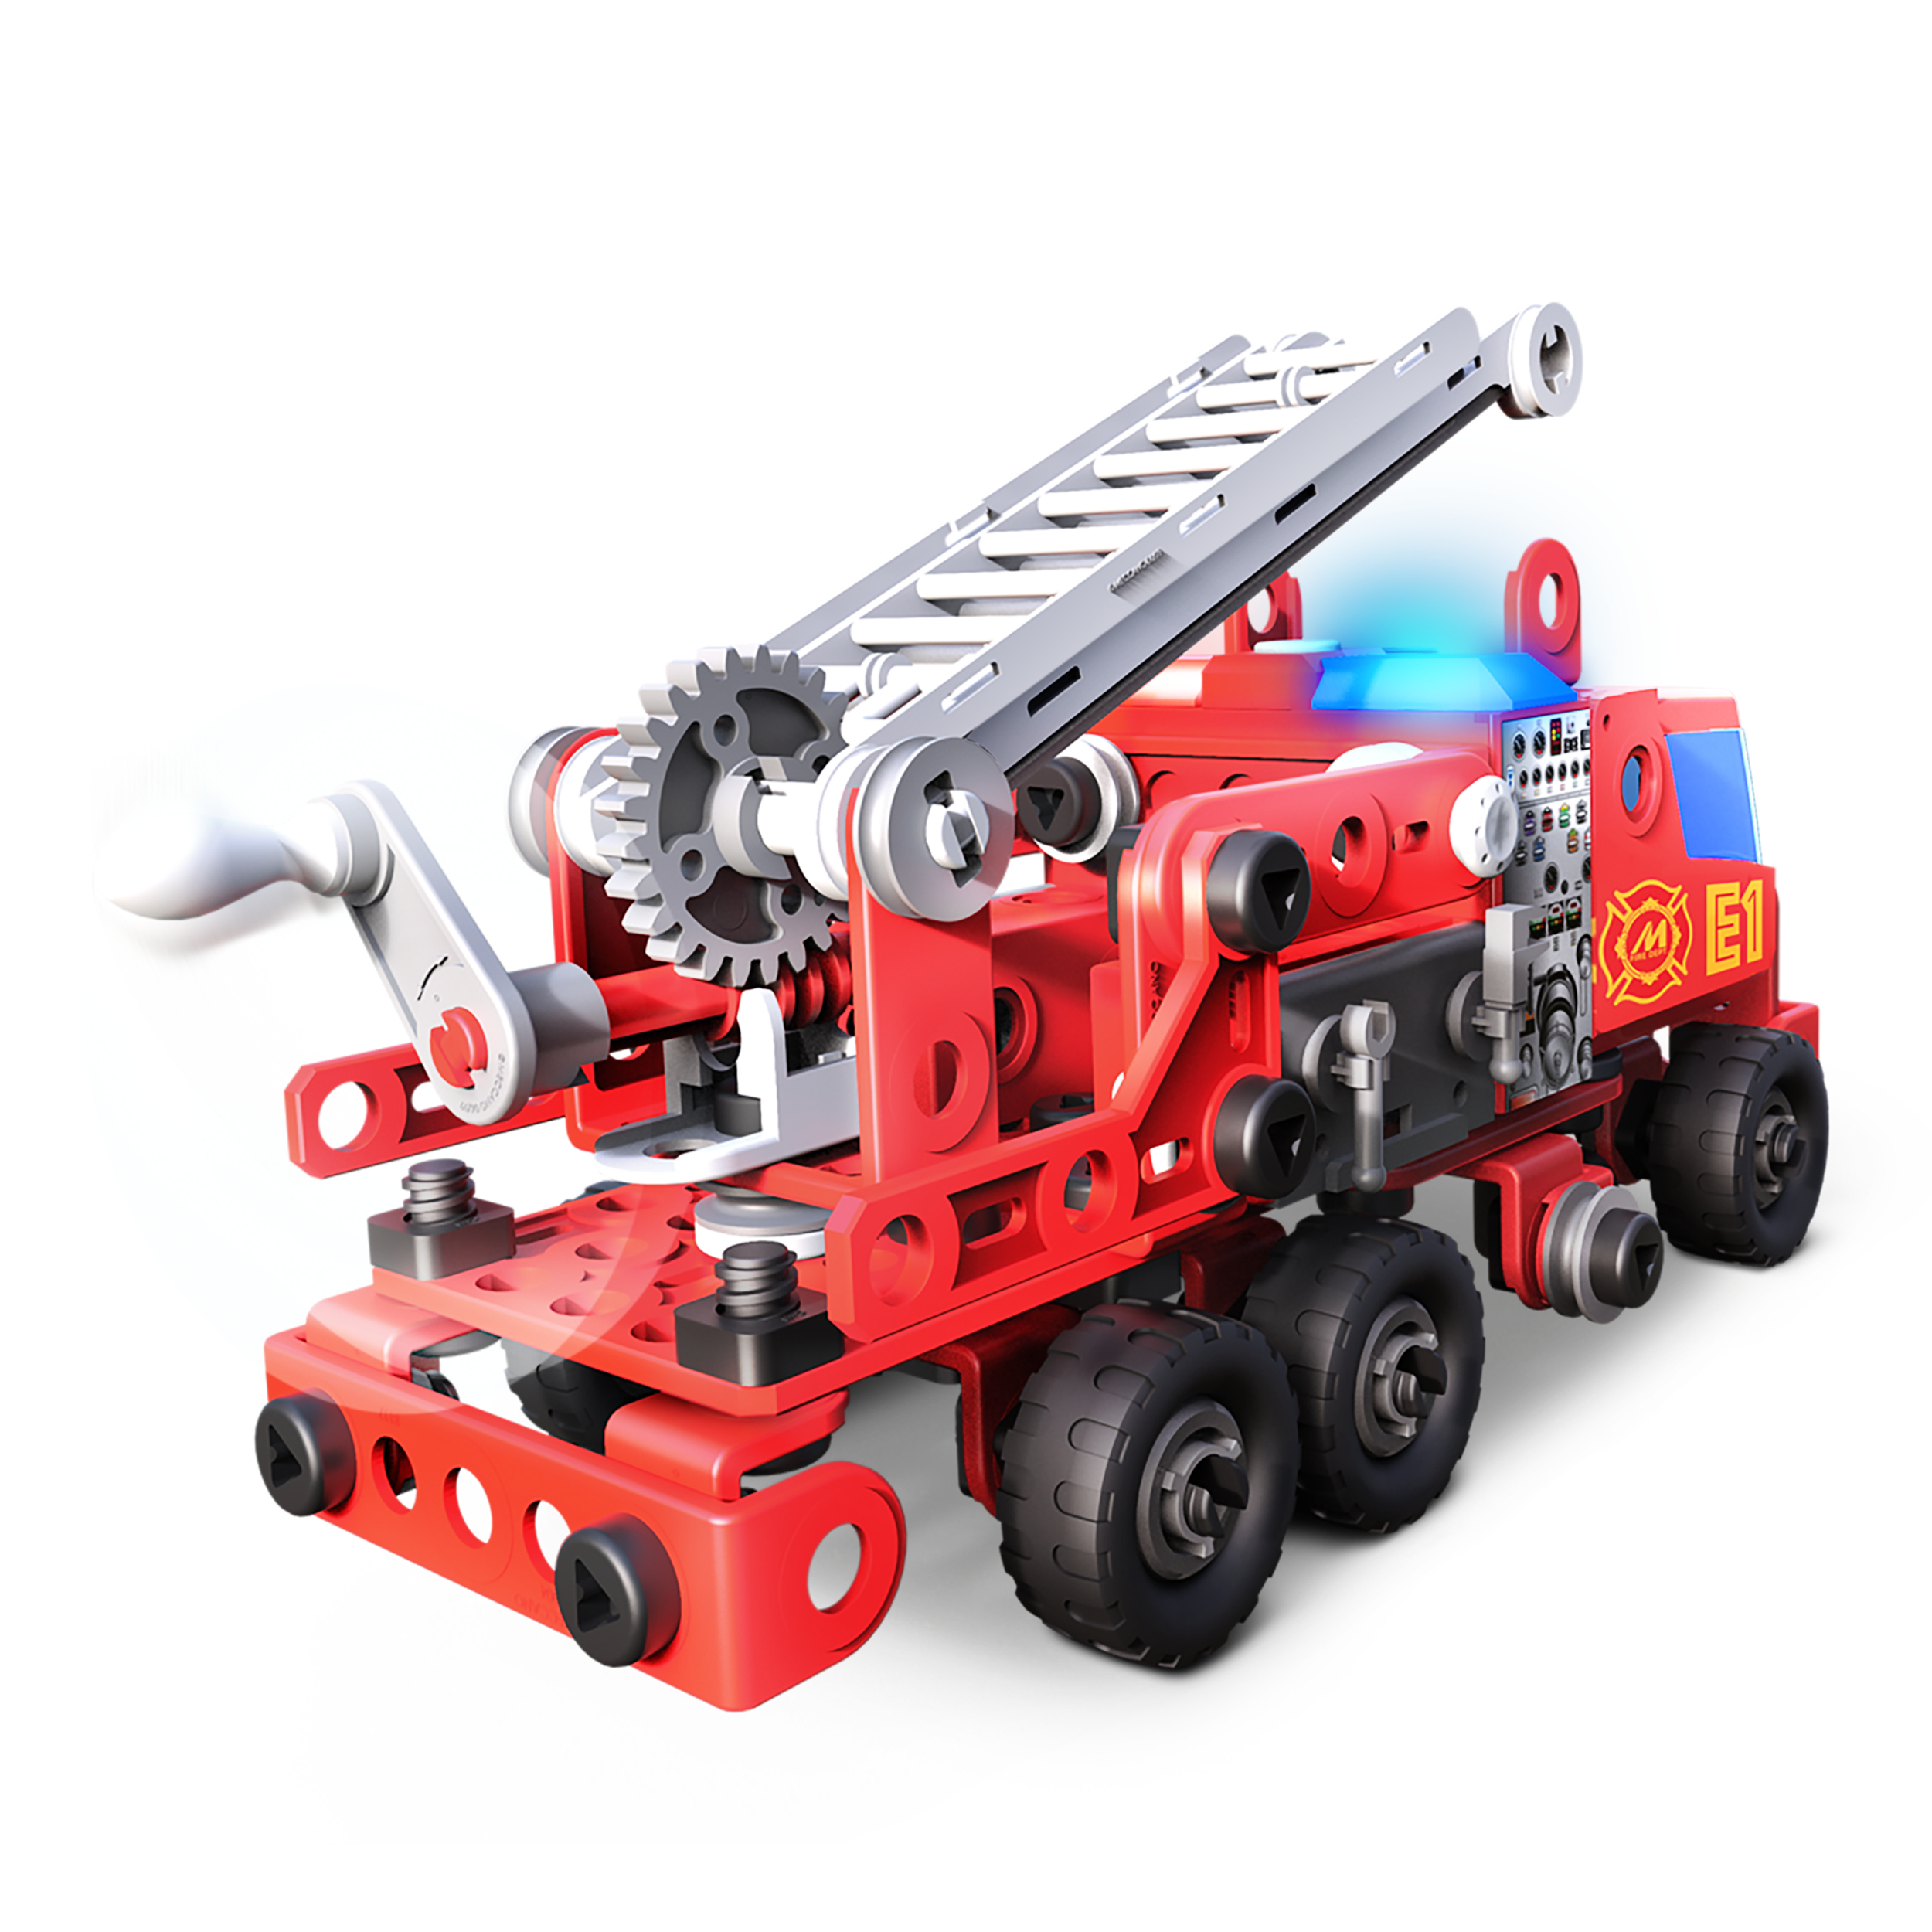 Meccano Junior Rescue Fire Truck with Lights and Sounds Model Building Kit - image 5 of 8